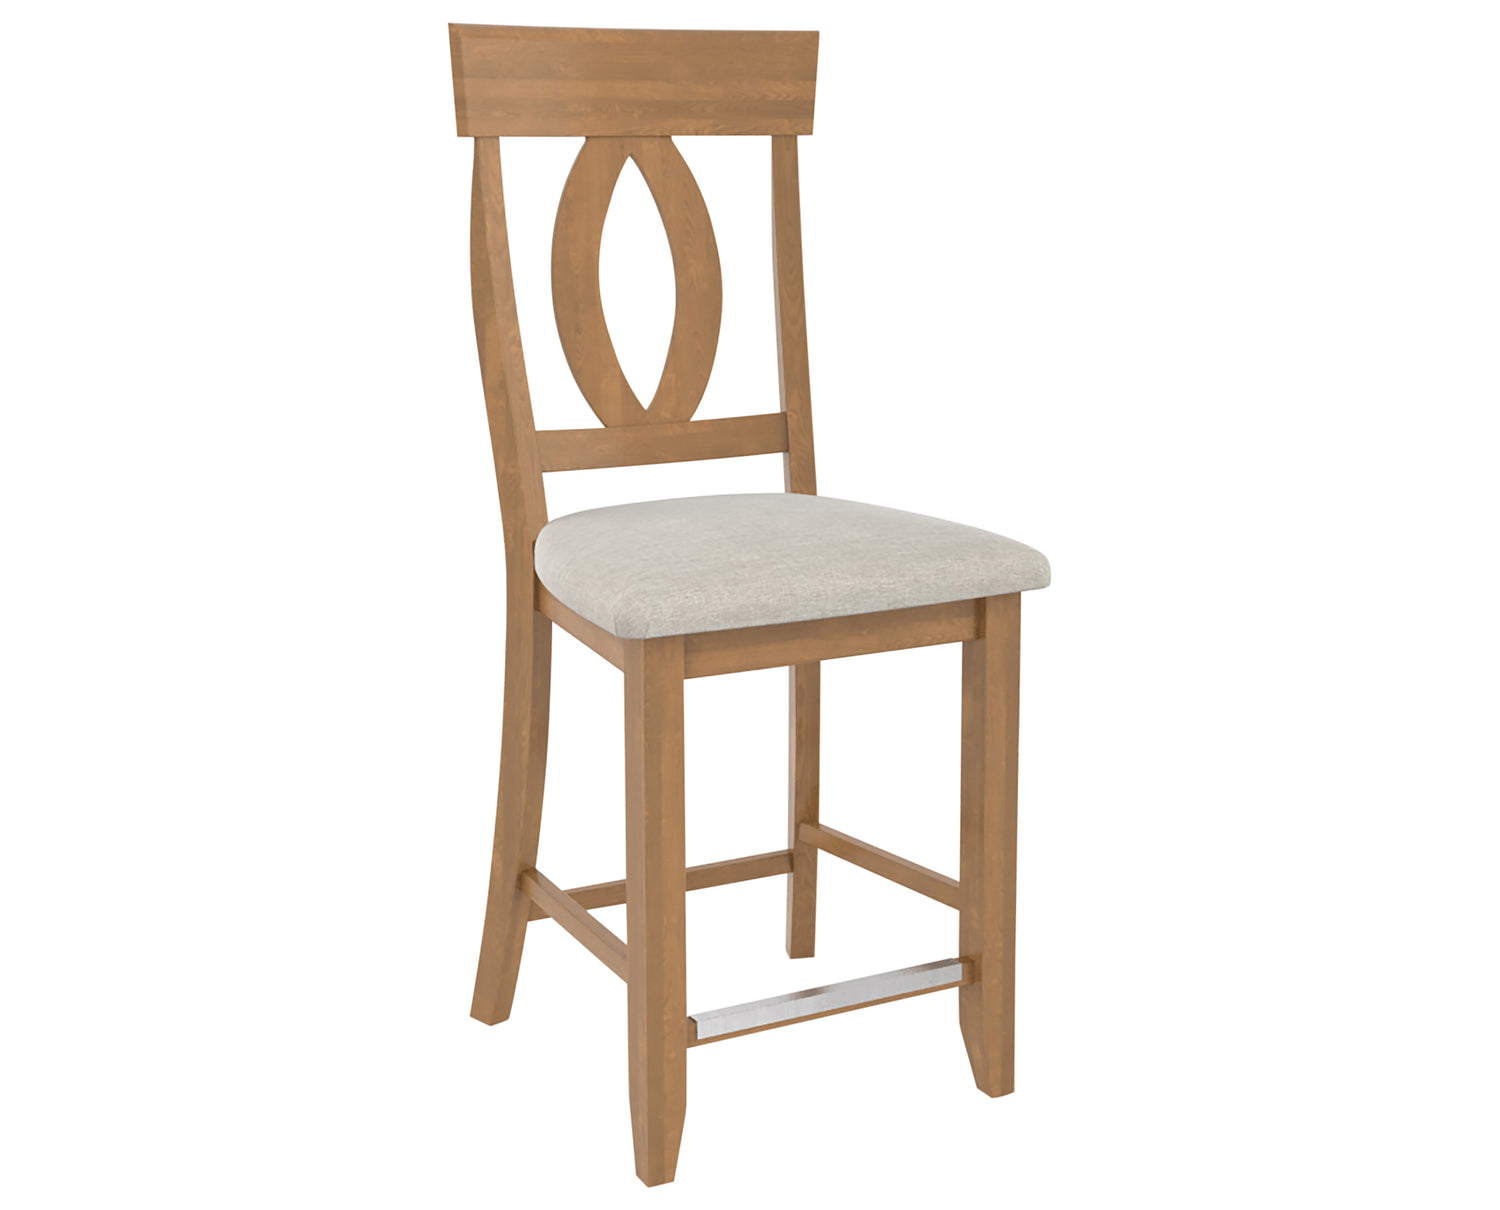 Fixed Base | Canadel Core Counter Stool 8100 | Valley Ridge Furniture